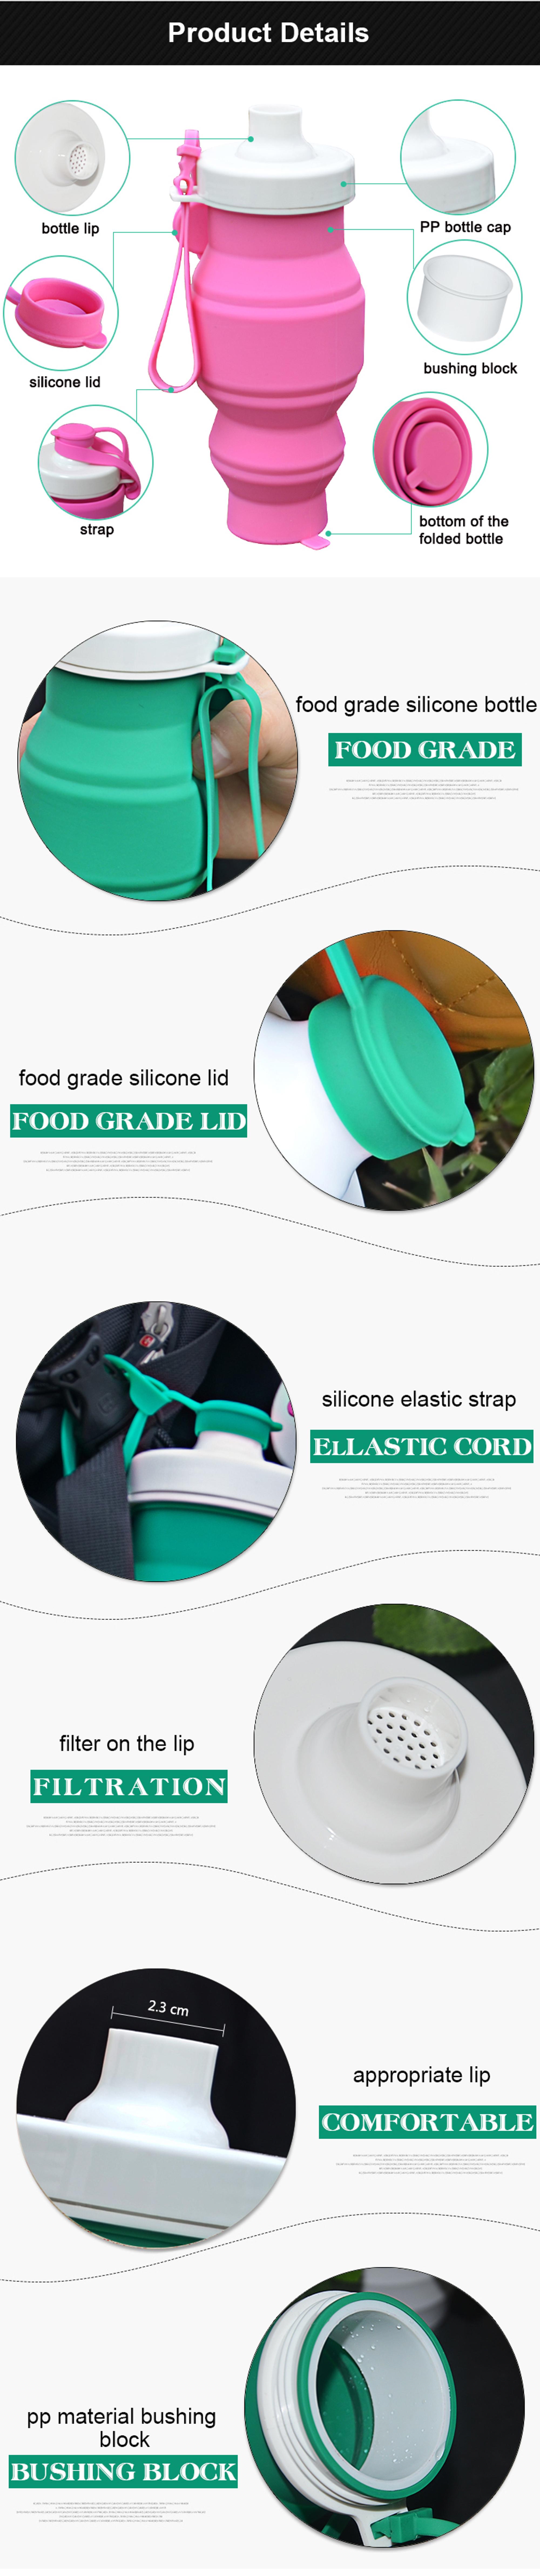 Stock foldable silicone collapsible water bottle 11